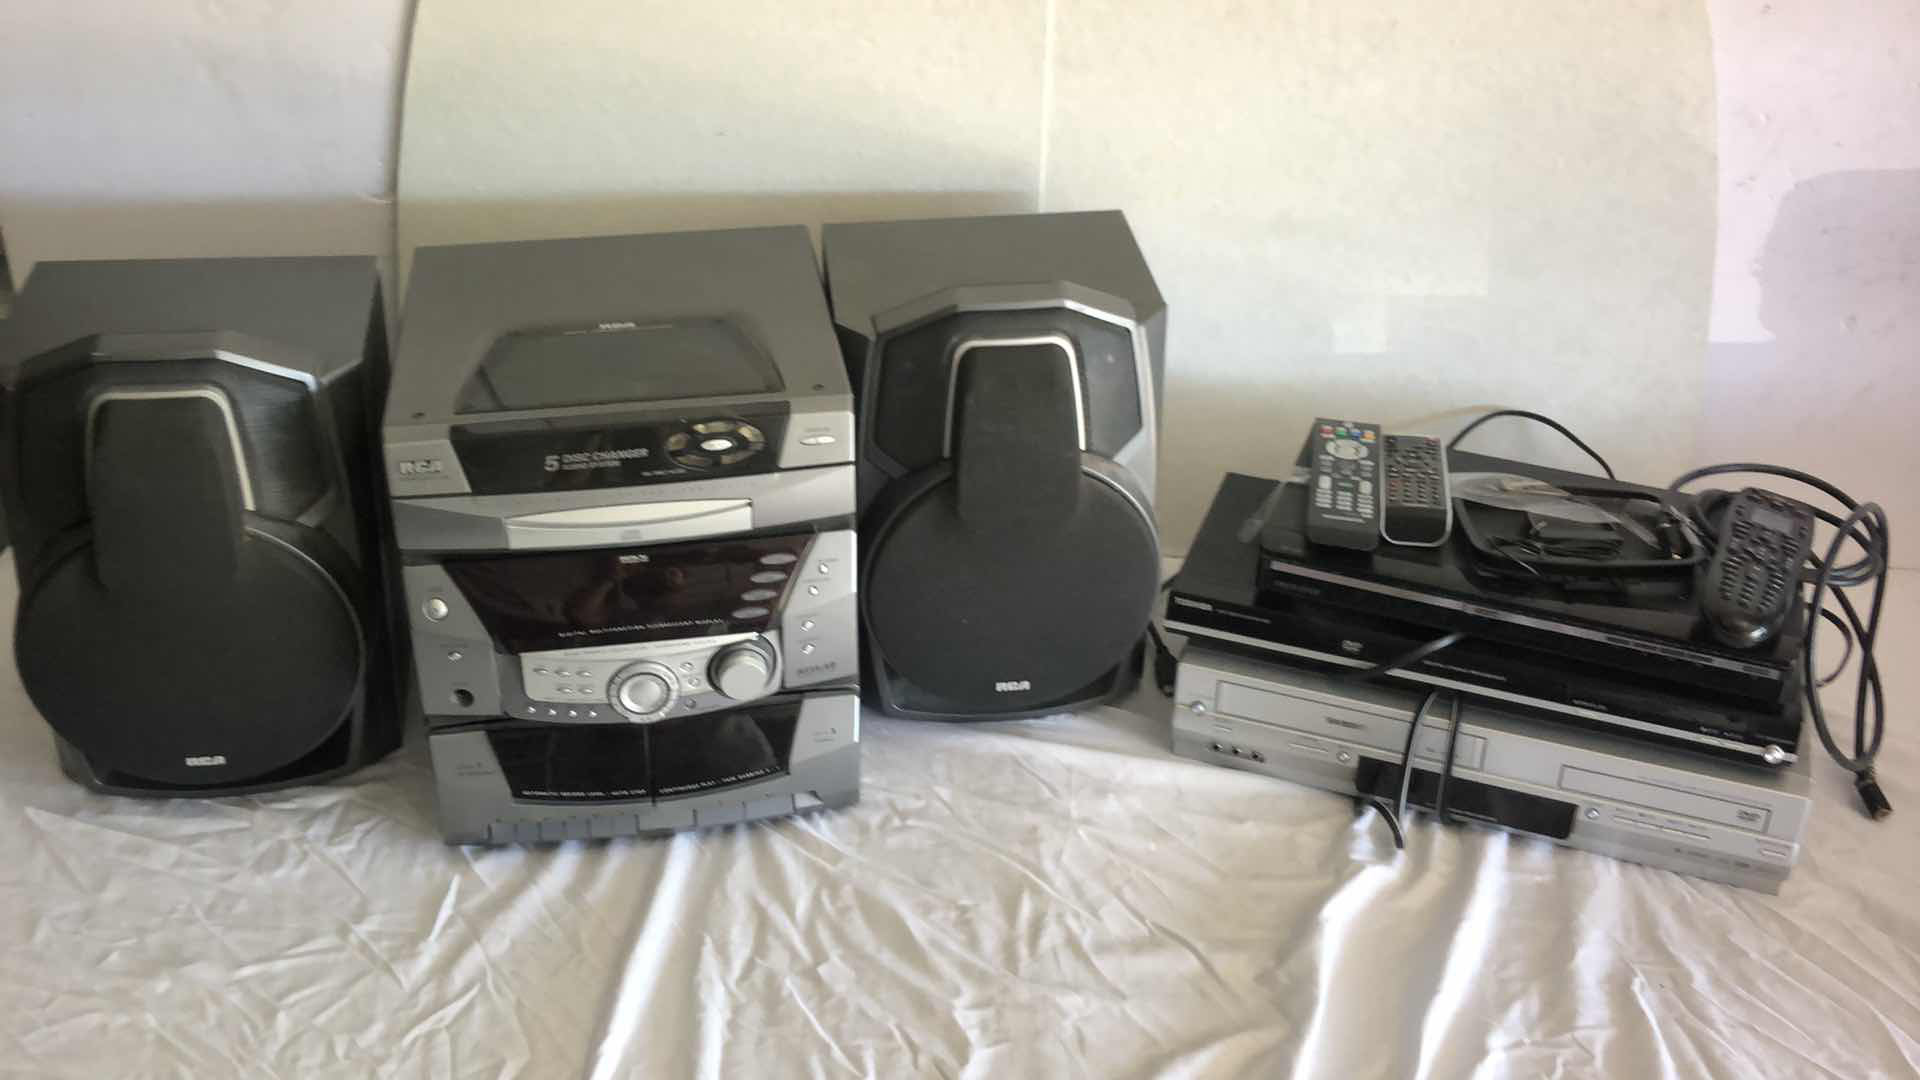 Photo 2 of ENTERTAINMENT BUNDLE RCA RS-255KM AUDIO SYSTEM, DVD AND VHS PLAYERS W REMOTES, STAR TREK VHS SETS